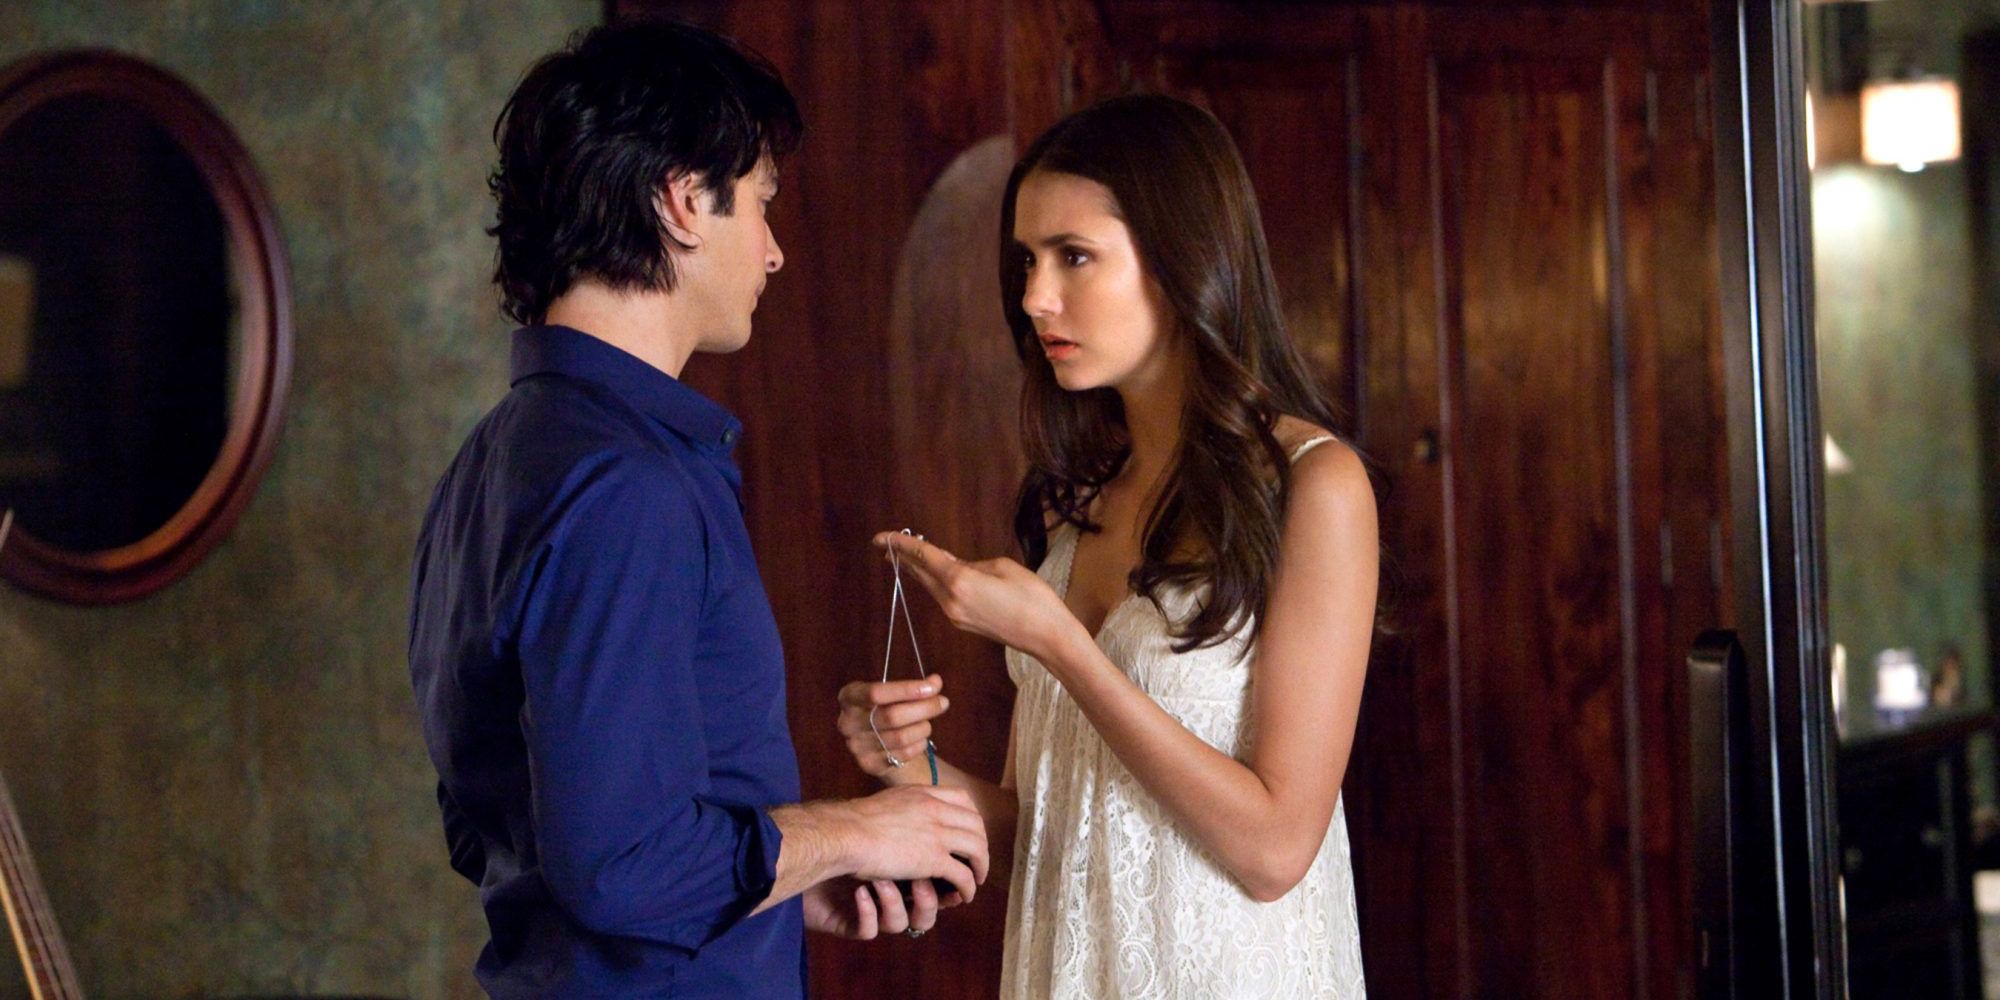 Damon gives Elena her necklace in The Vampire Diaries.